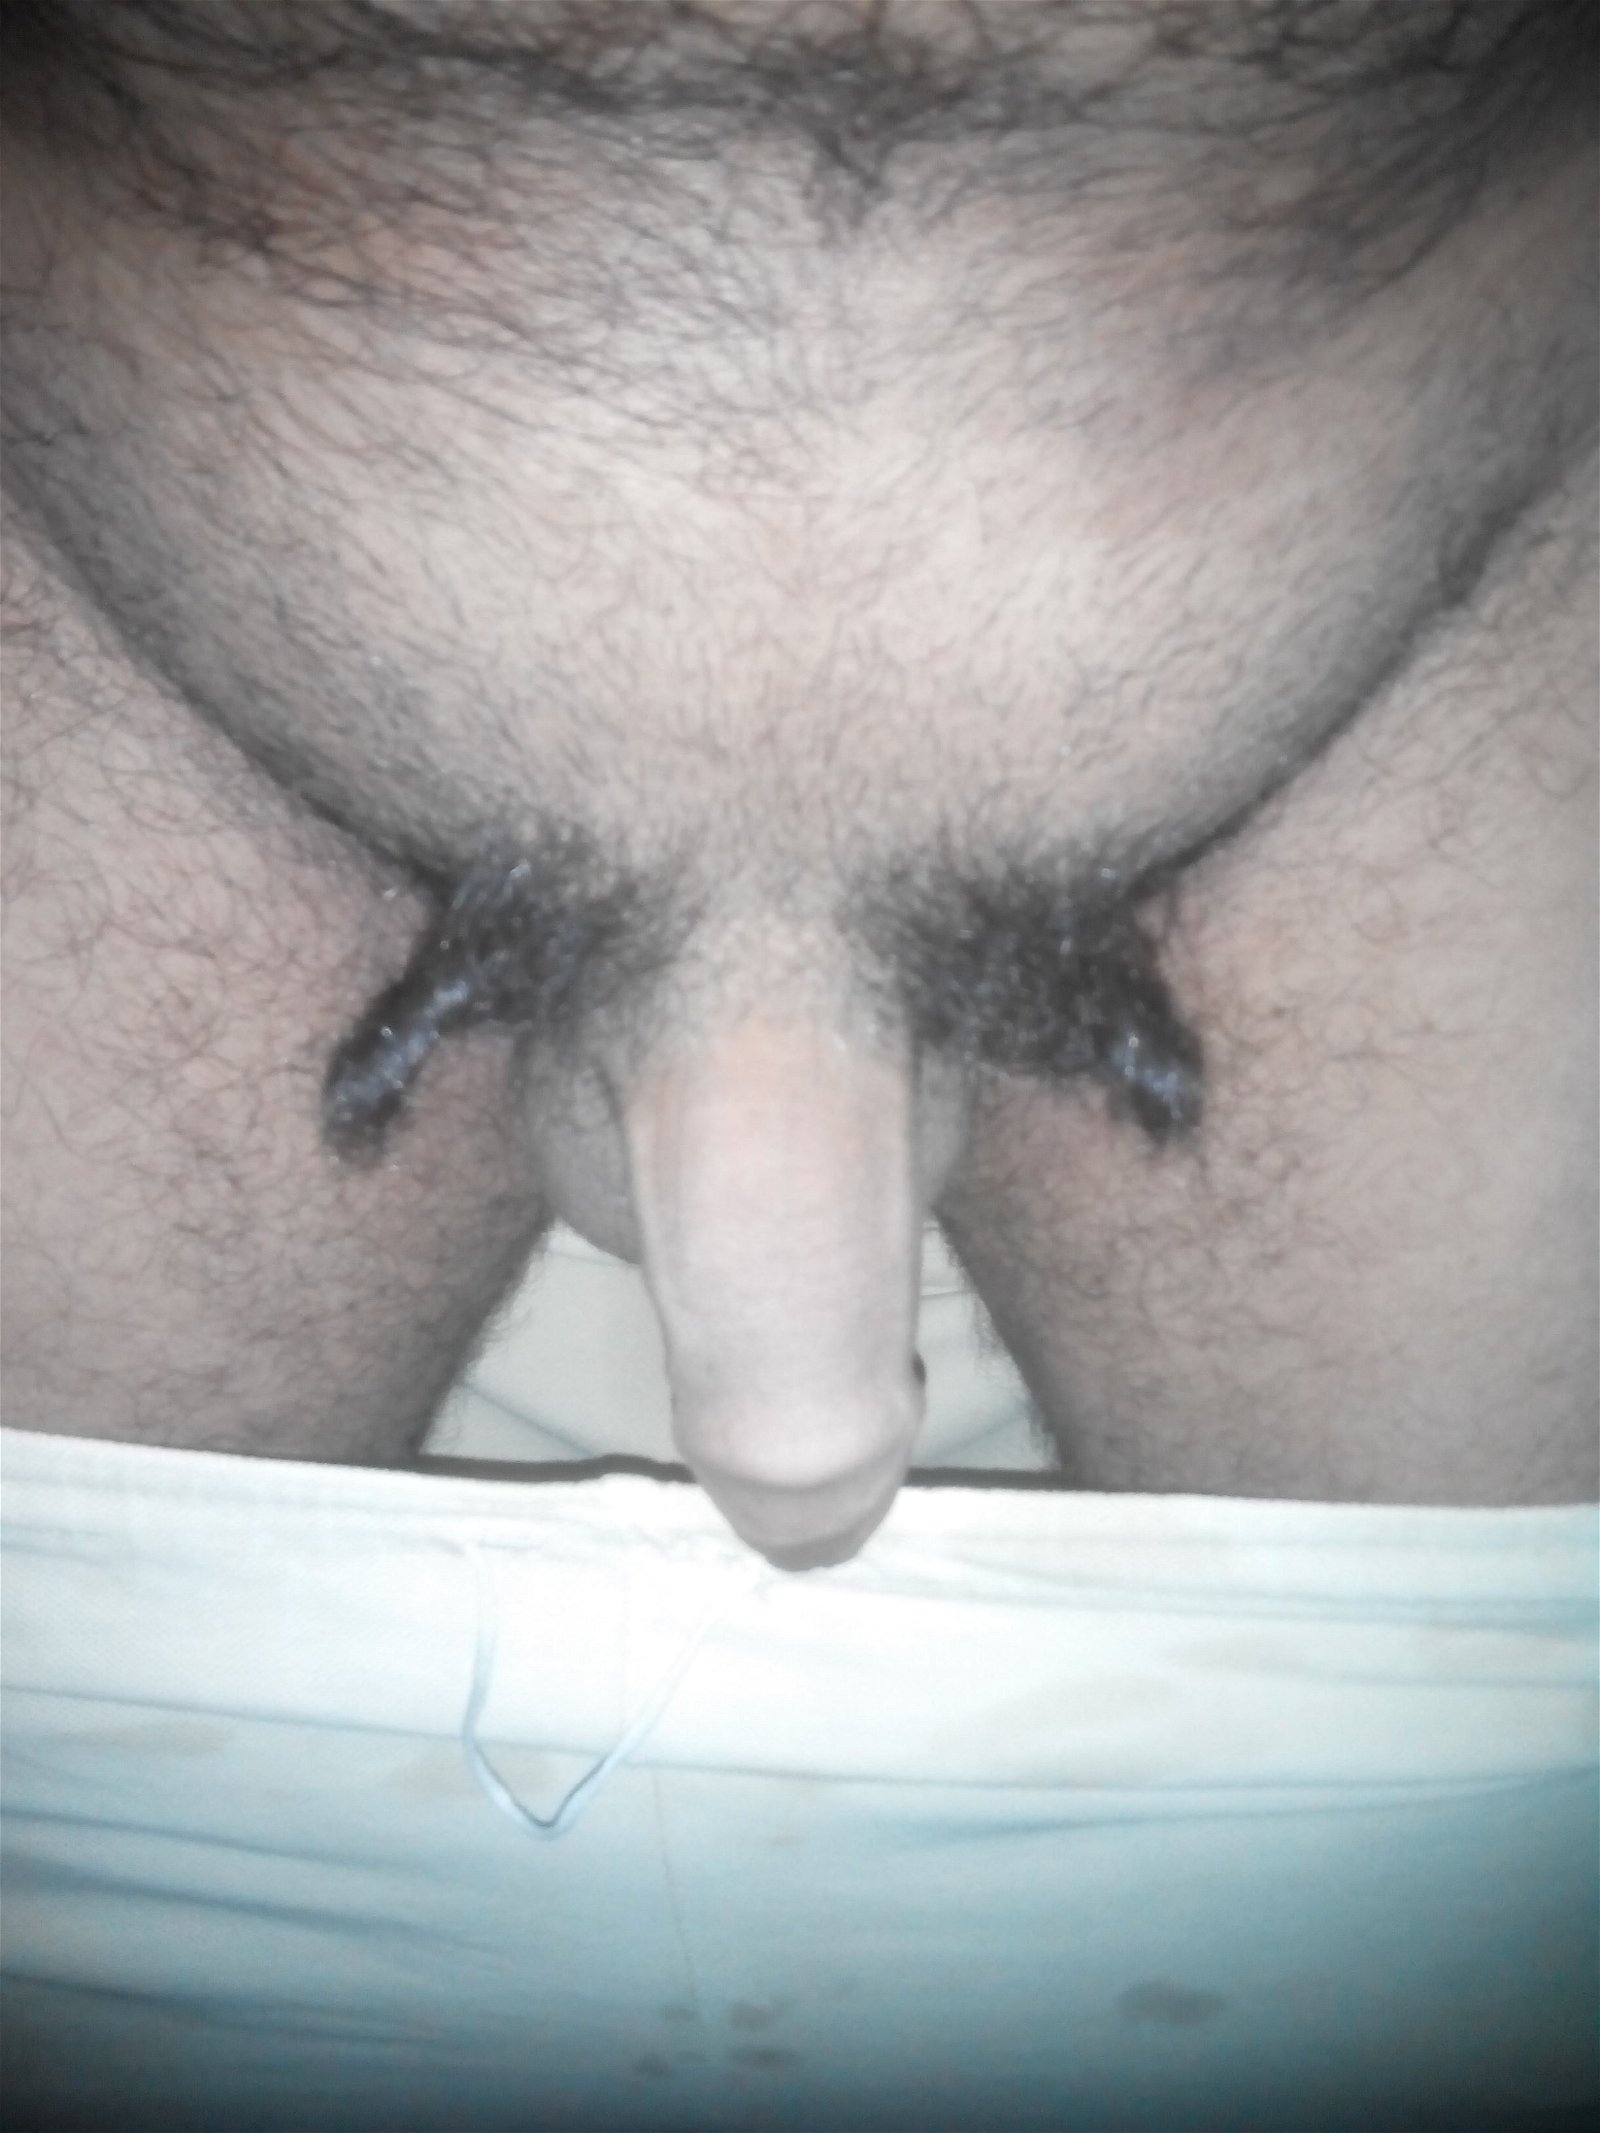 Photo by Pussy Hunter with the username @raj1040,  February 15, 2020 at 6:45 AM. The post is about the topic Hairy Penis